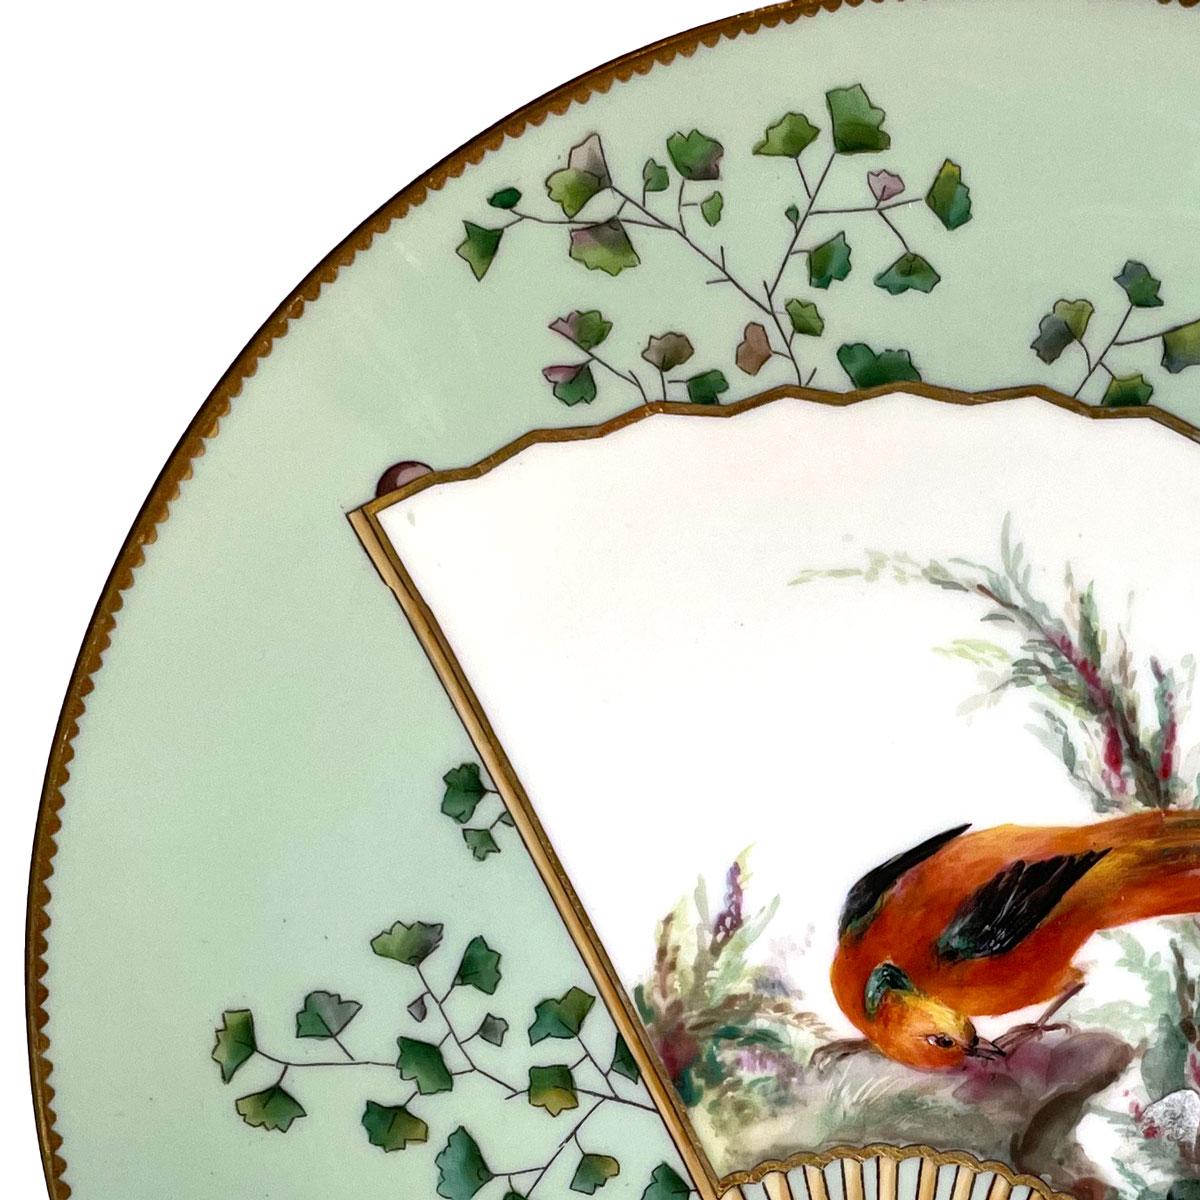 Green Aesthetic Minton Porcelain Plate in the style of Japonism creations made by Christopher Dresser. Round plate adorned with an oriental fan representing a lovely and colorful bird. Lovely decorations, with plants and oriental items.
Stamped